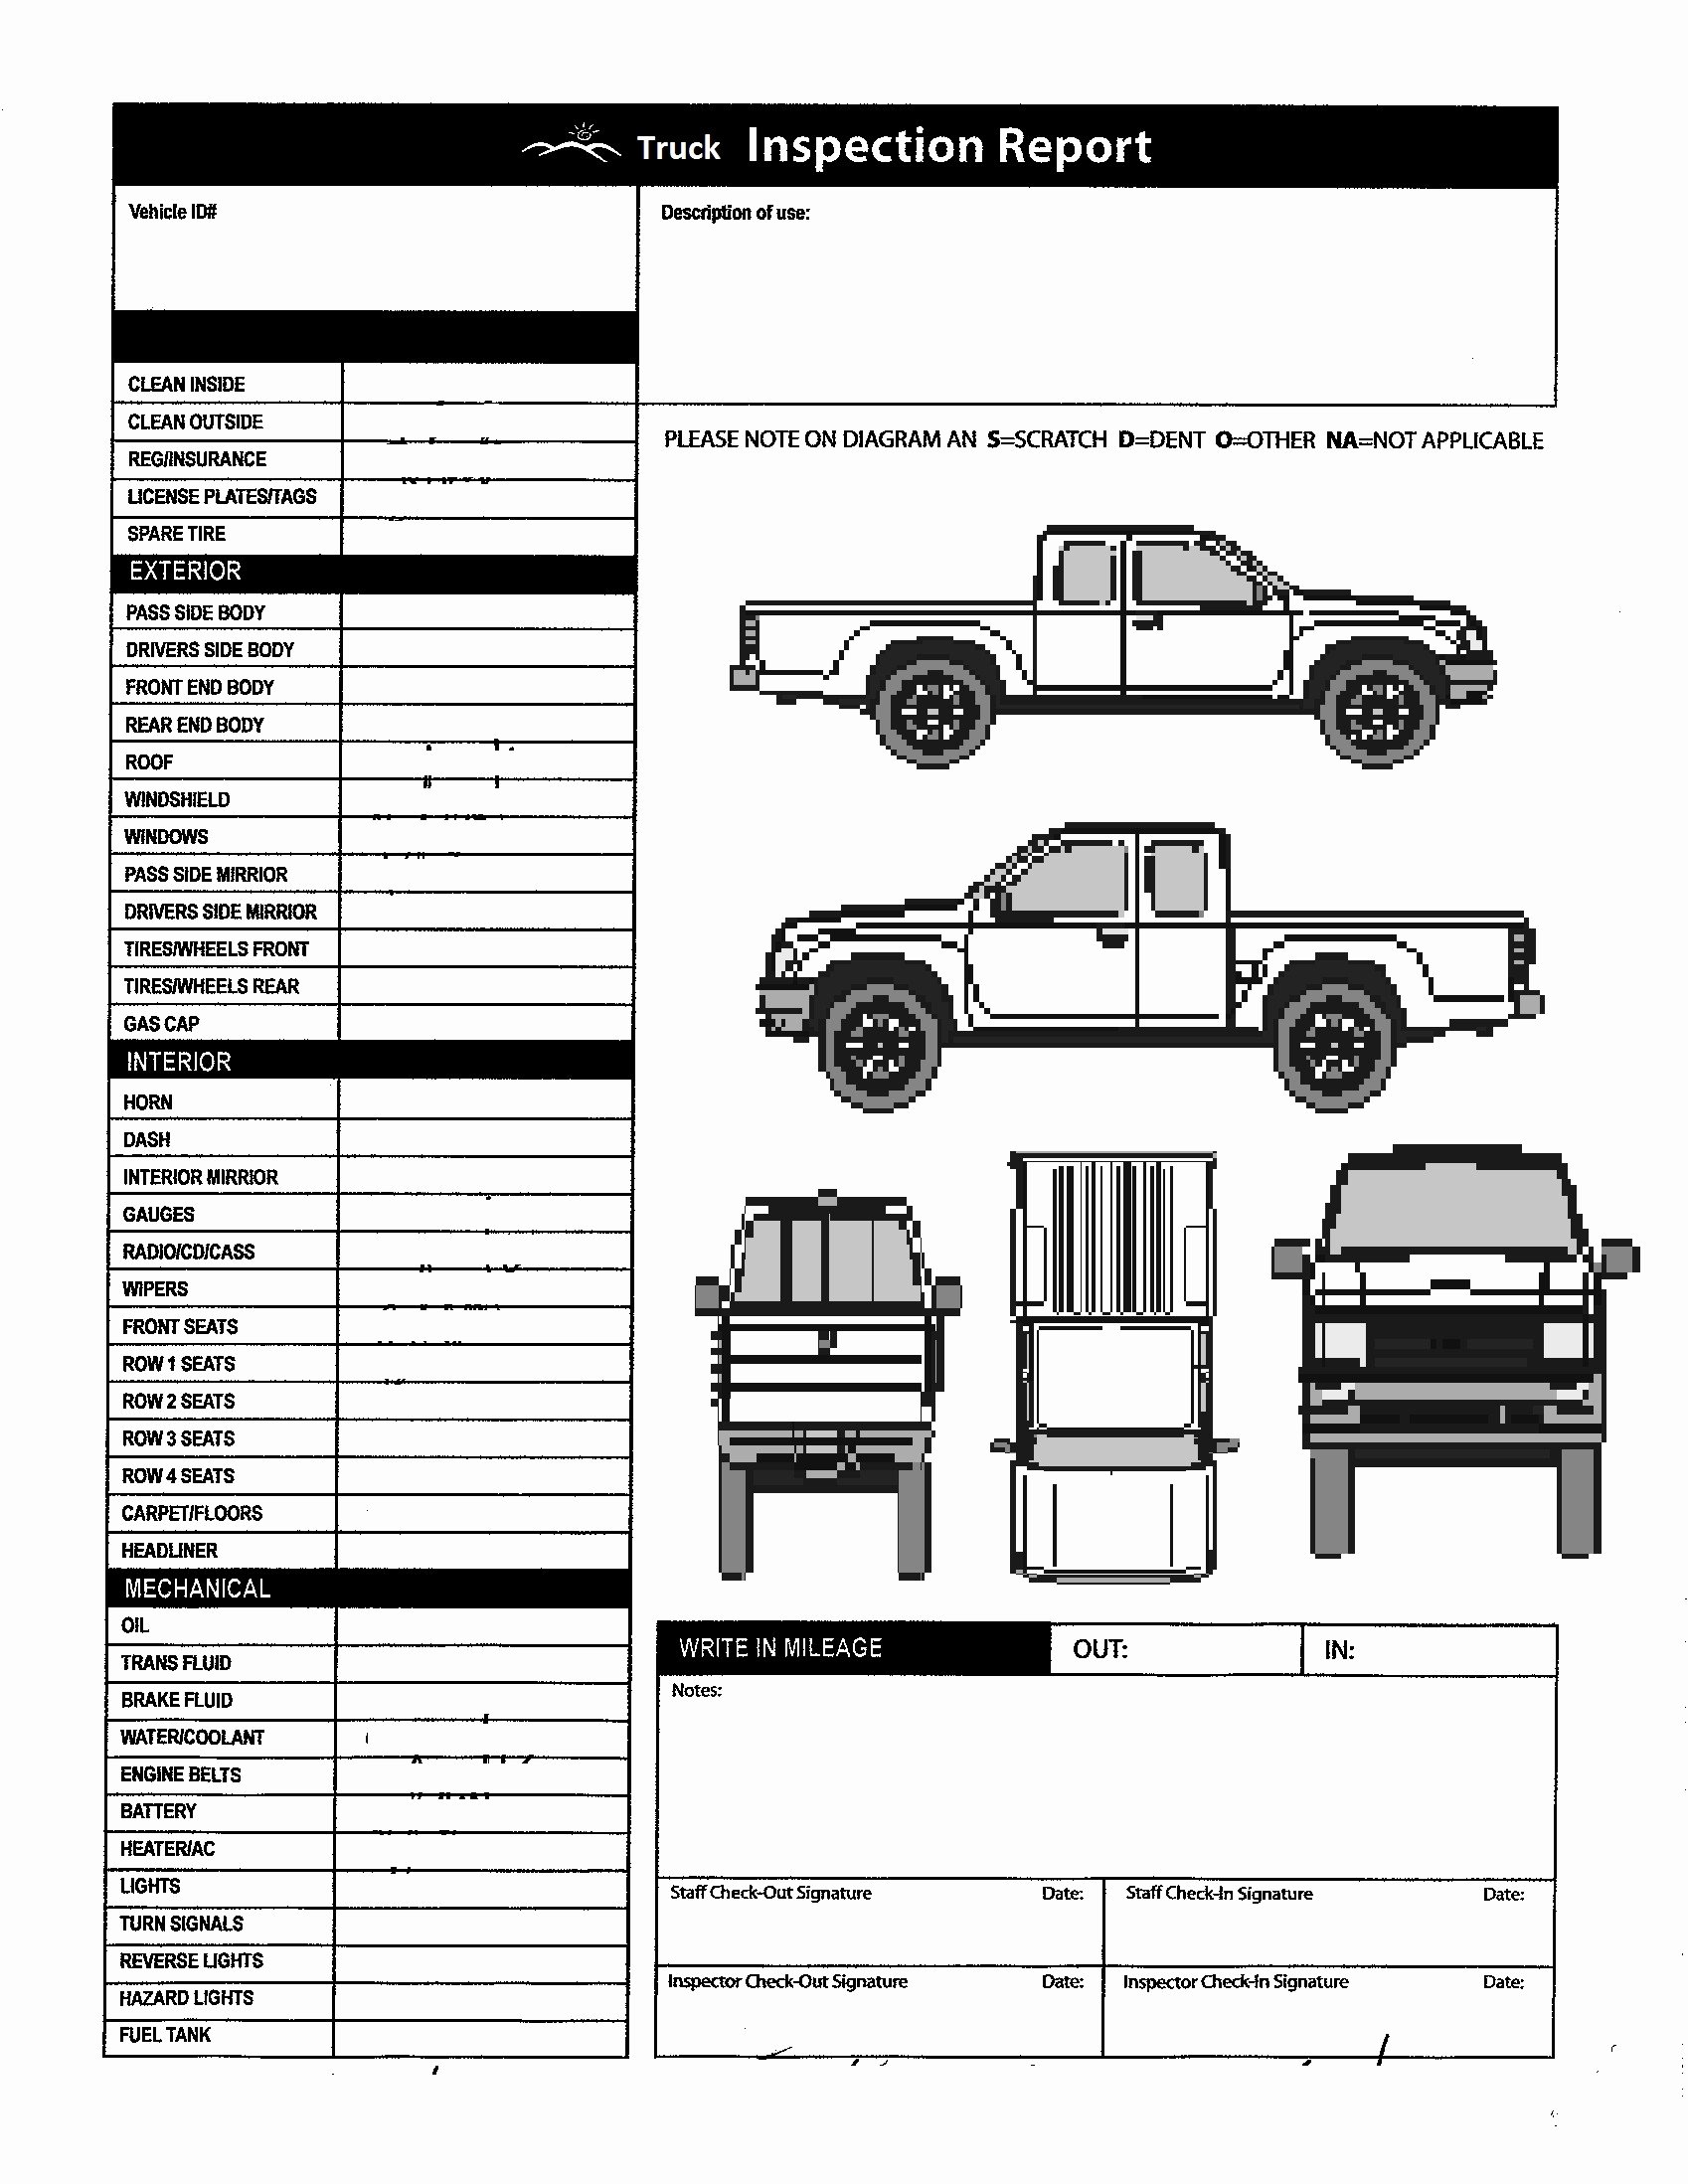 Vehicle Inspection form Template